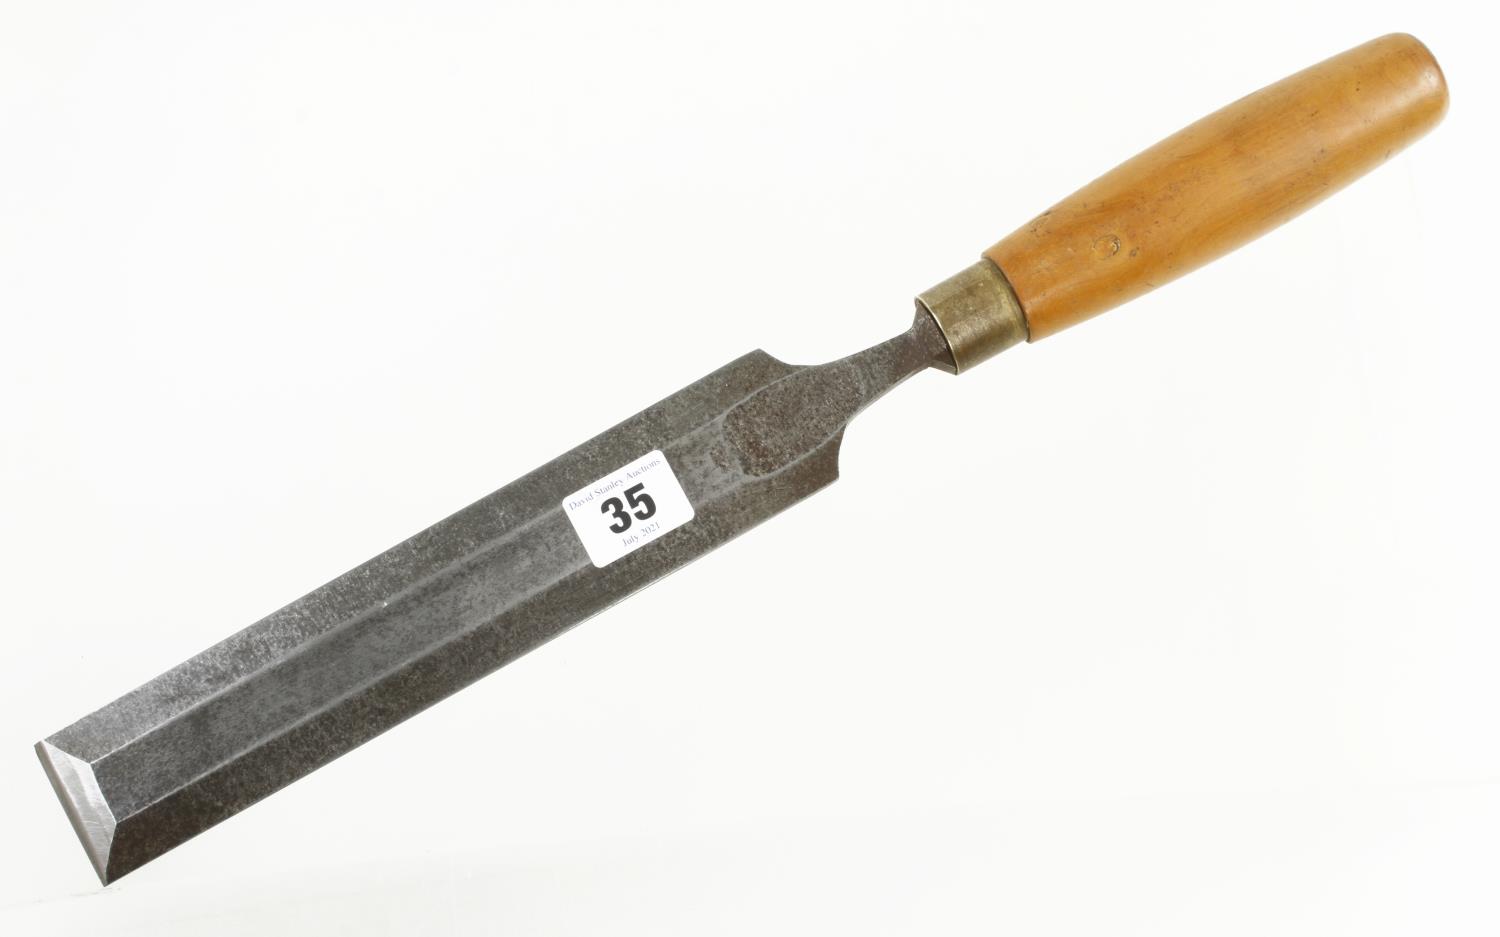 A 1 3/4" bevel edge chisel with boxwood handle by MARPLES (name erased) G